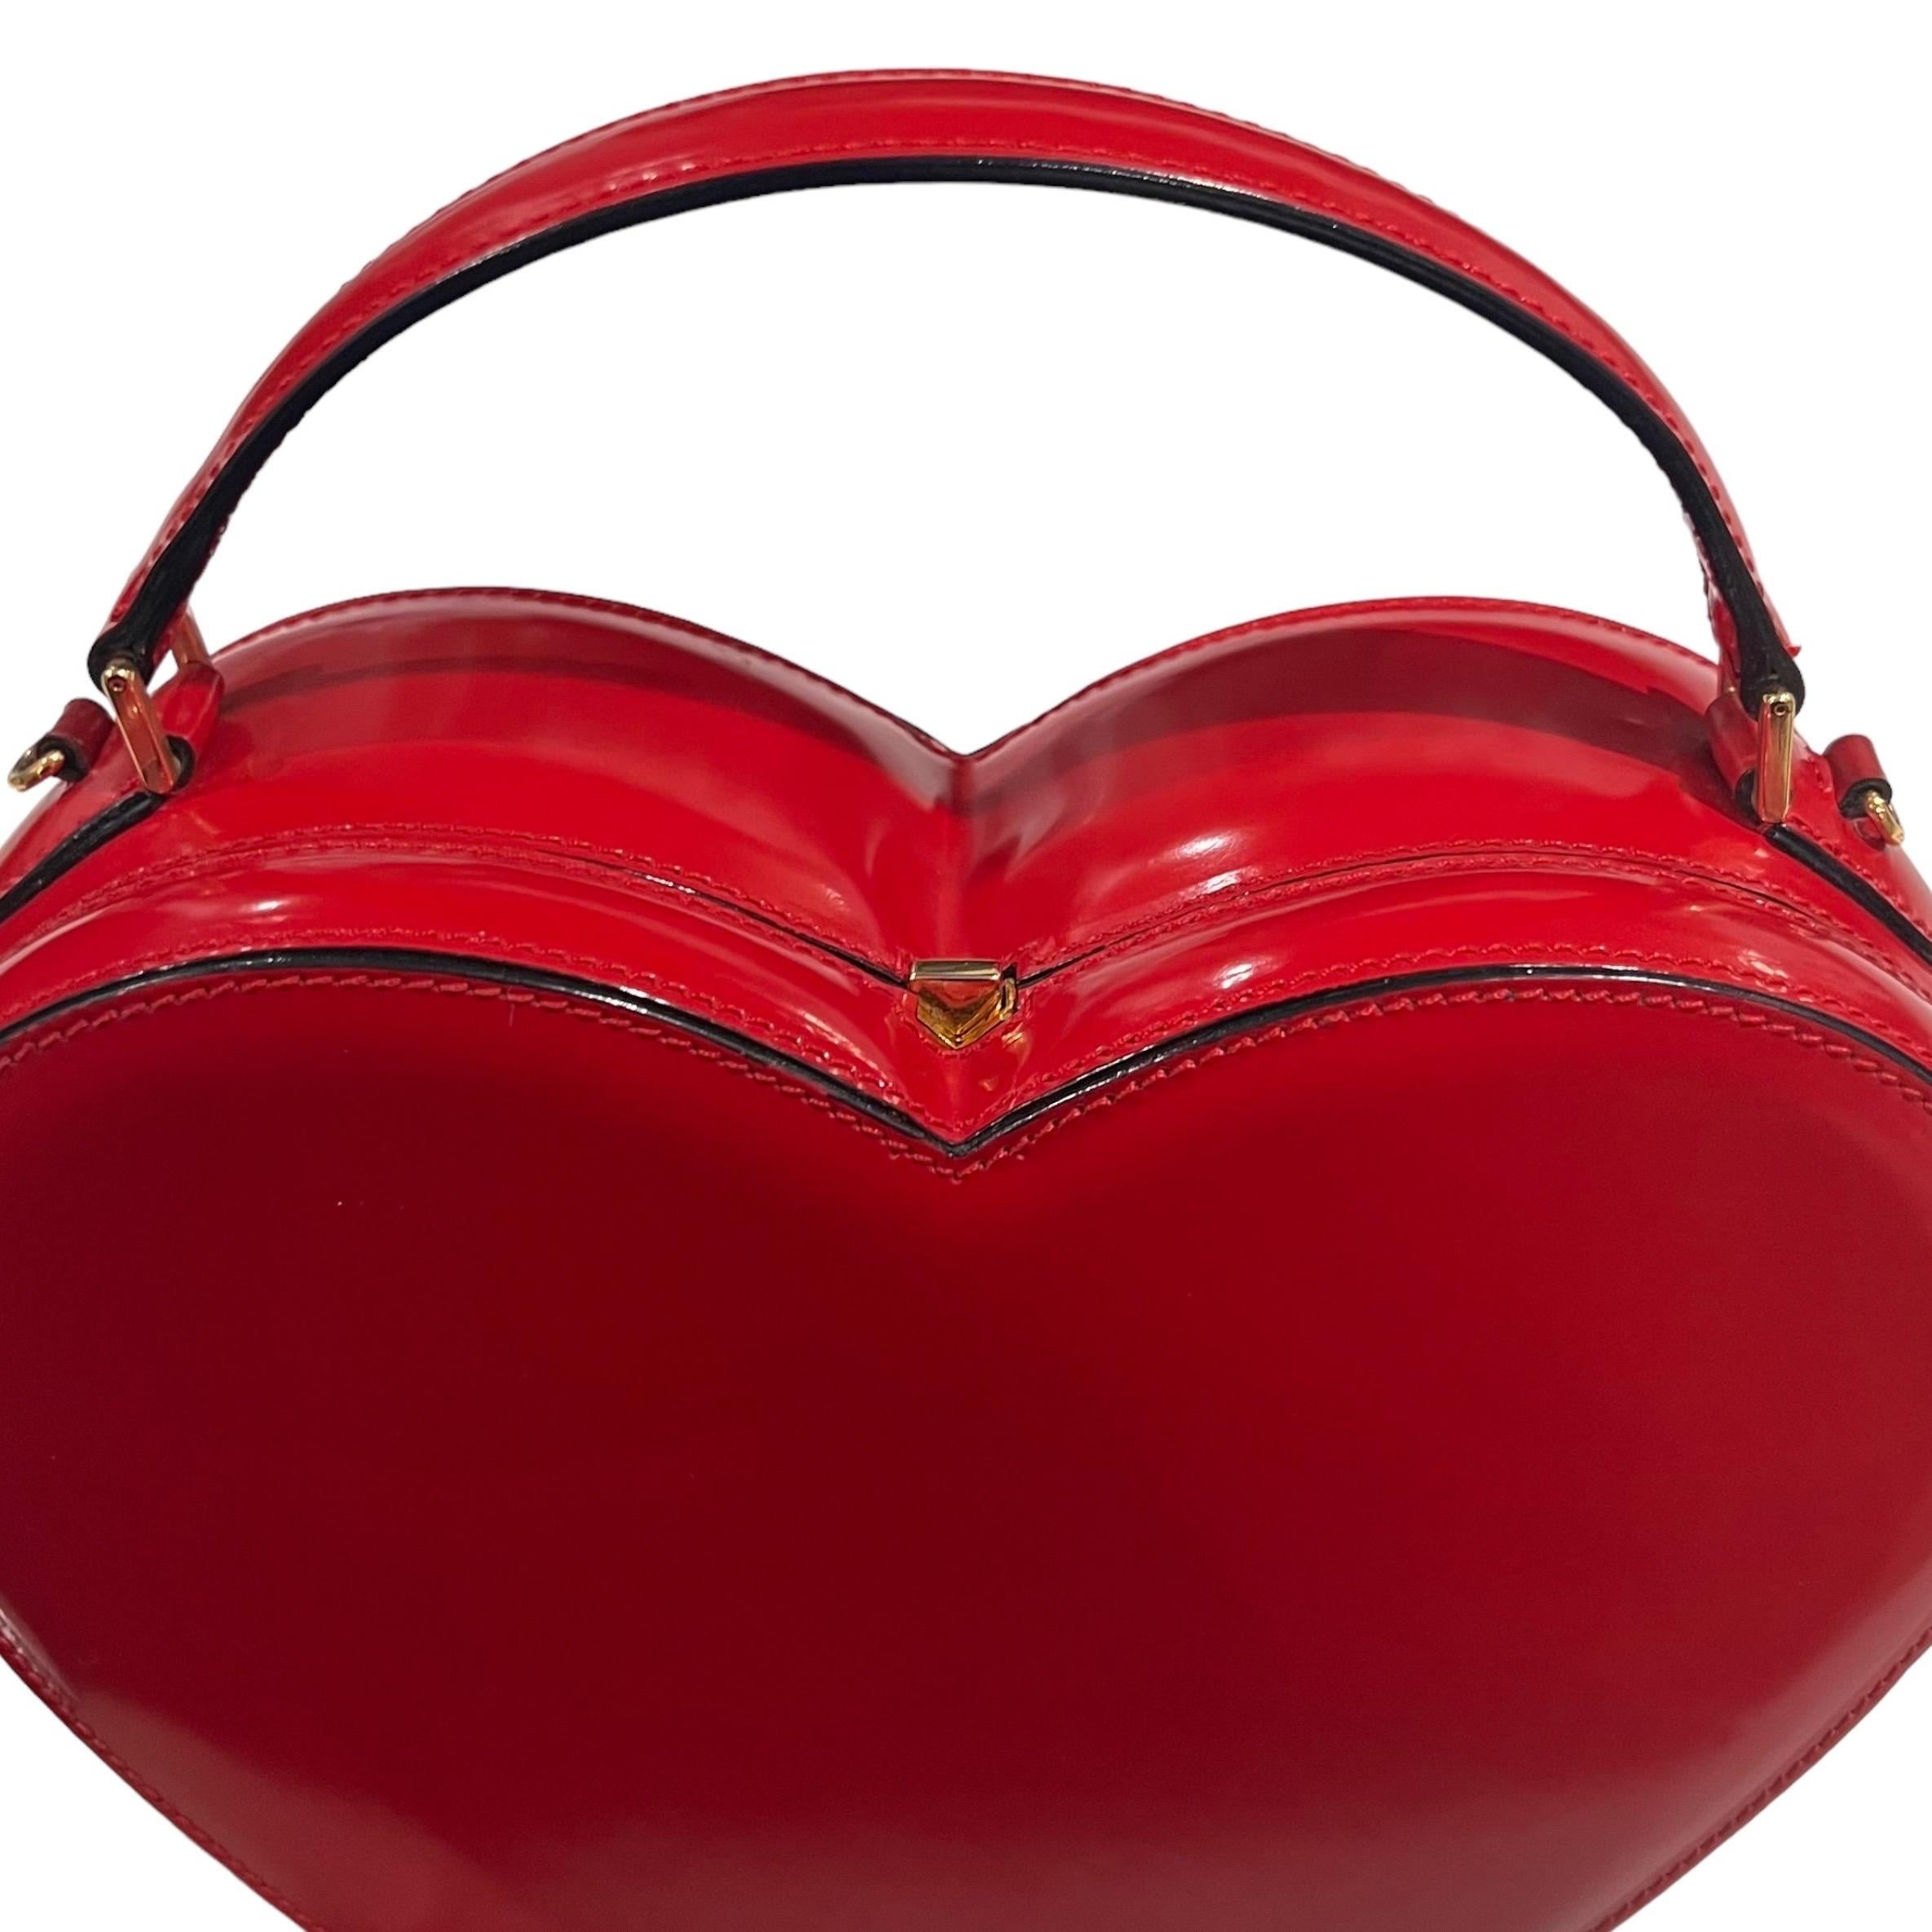 1990's Moschino Red Leather Heart Bag seen on The Nanny 2